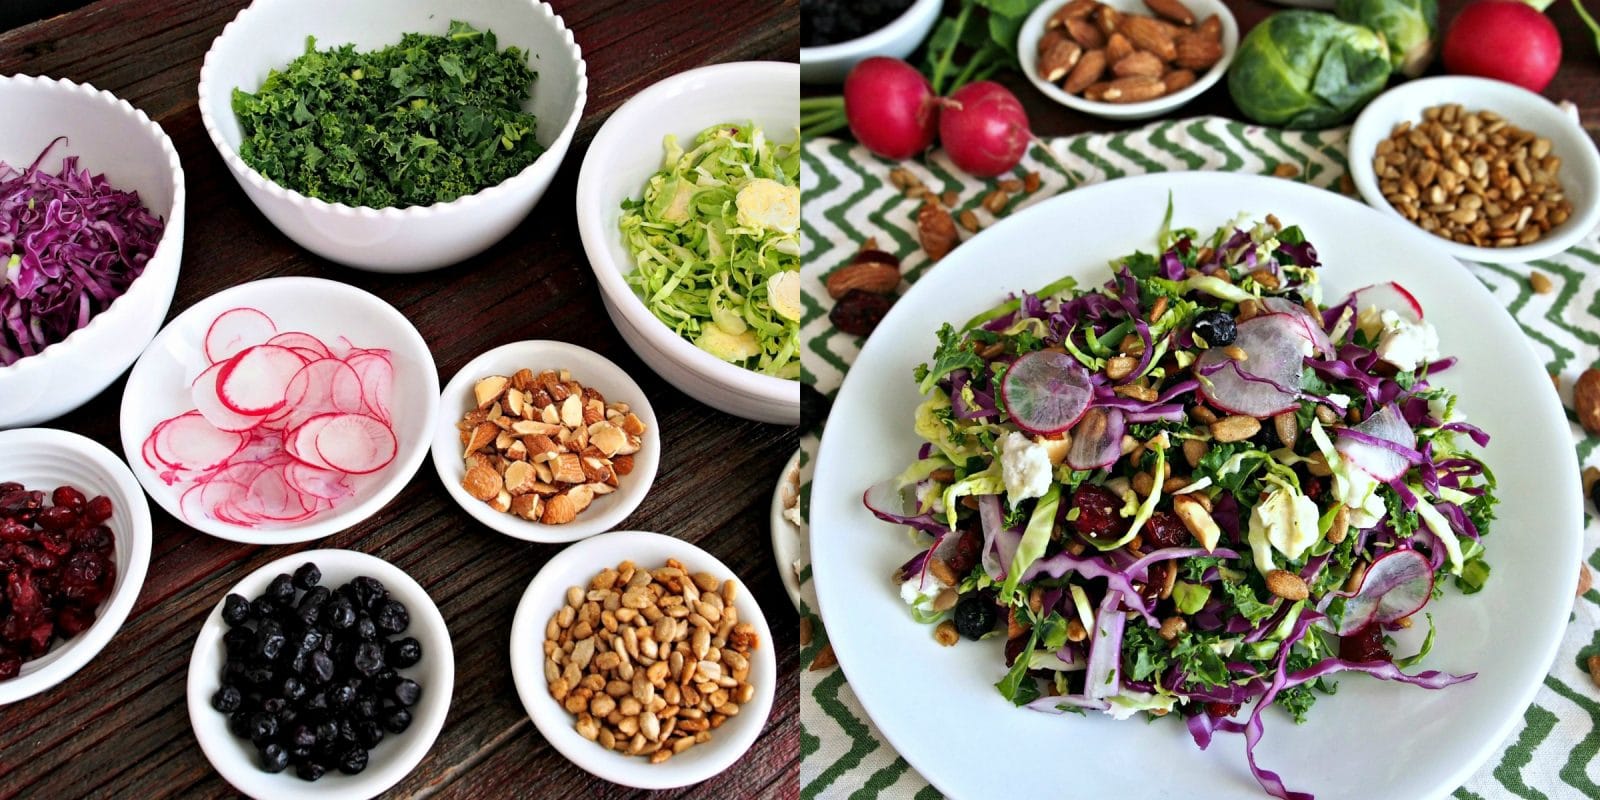 Power Salad with Spicy Honey Vinaigrette is packed with flavor & nutrients. Kale, broccoli, almonds, & others then drizzled with Spicy Honey Vinaigrette. Simply Sated